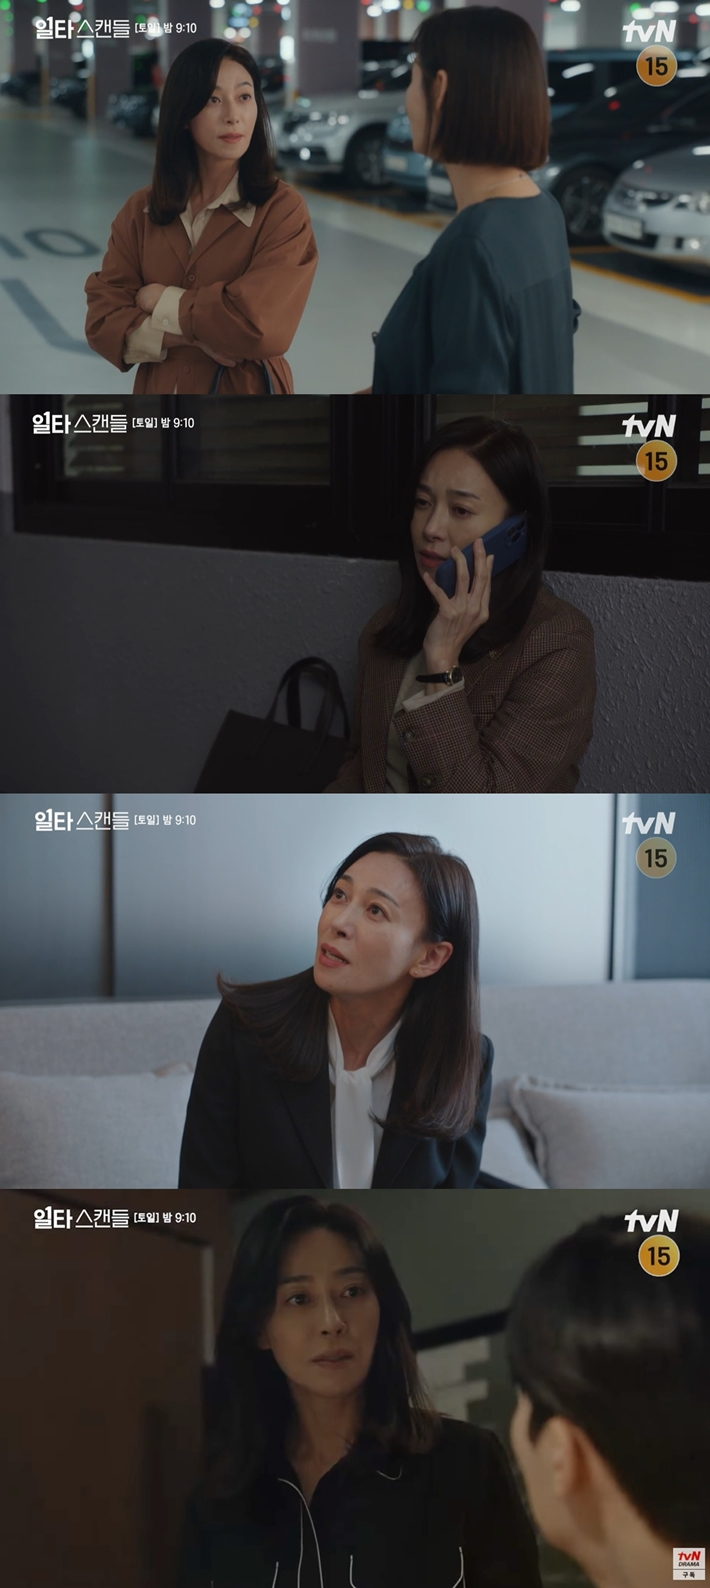 Jang Young-nam said that he created 'quiet', 'quiet' and 'soft' as keywords for the character Jang Seo-jin.  Captured from 'Ita Scandal'